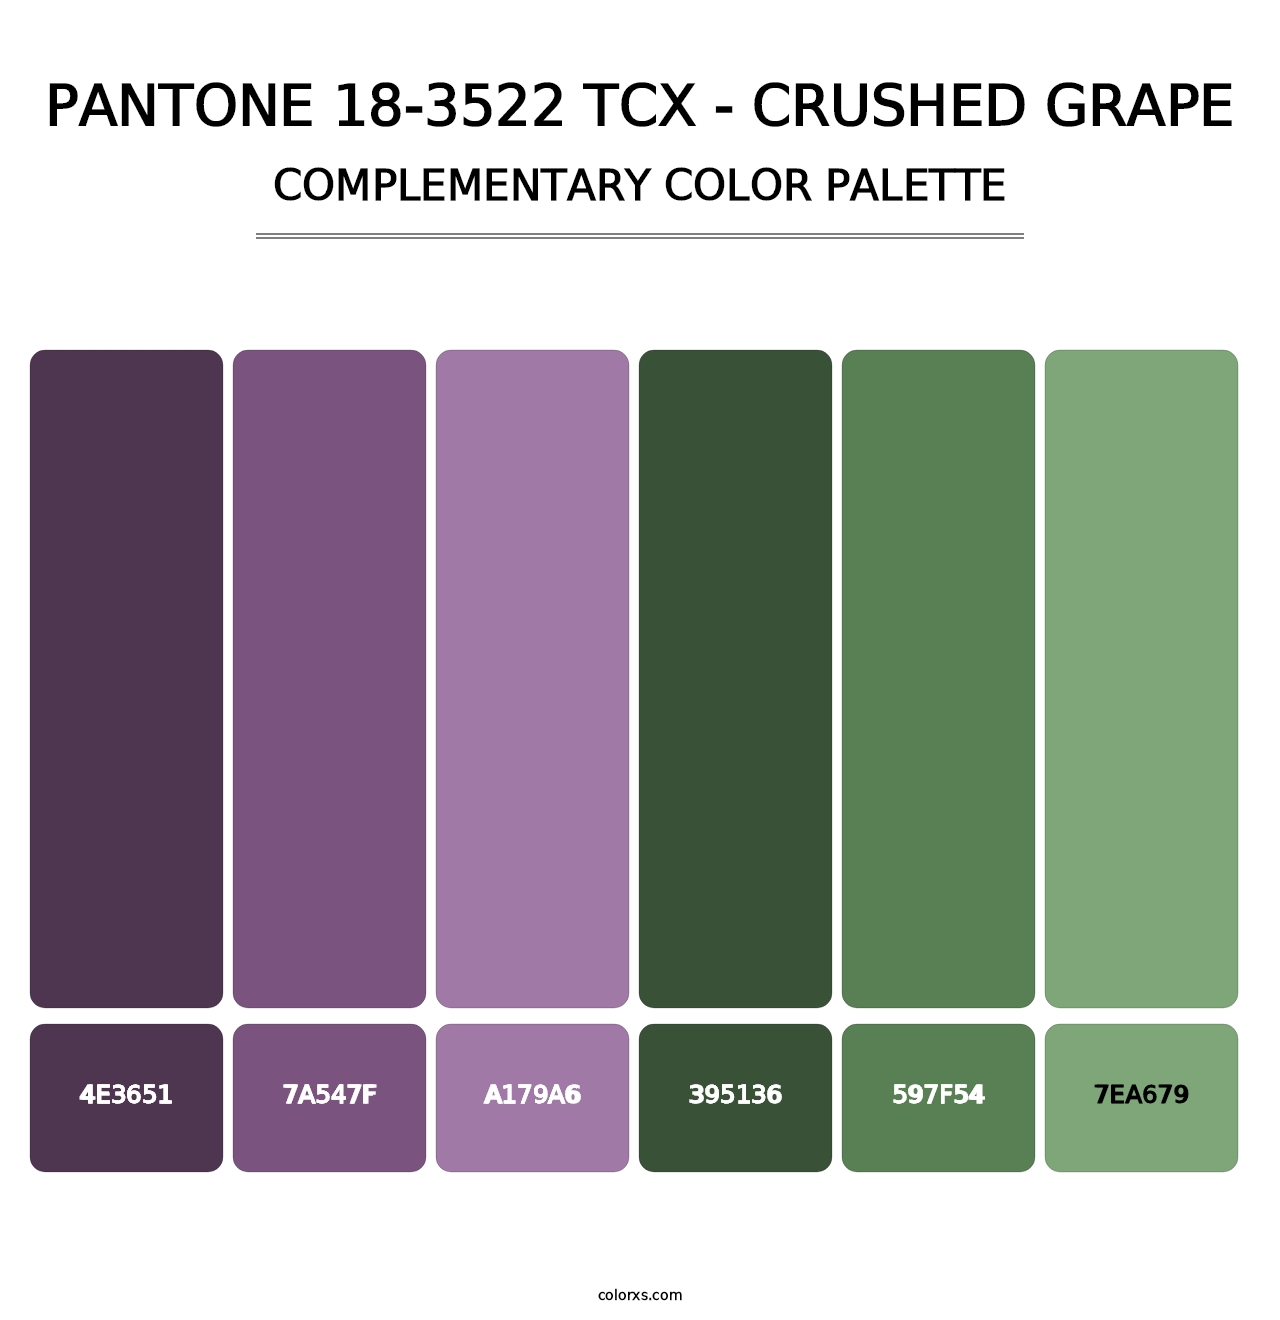 PANTONE 18-3522 TCX - Crushed Grape - Complementary Color Palette